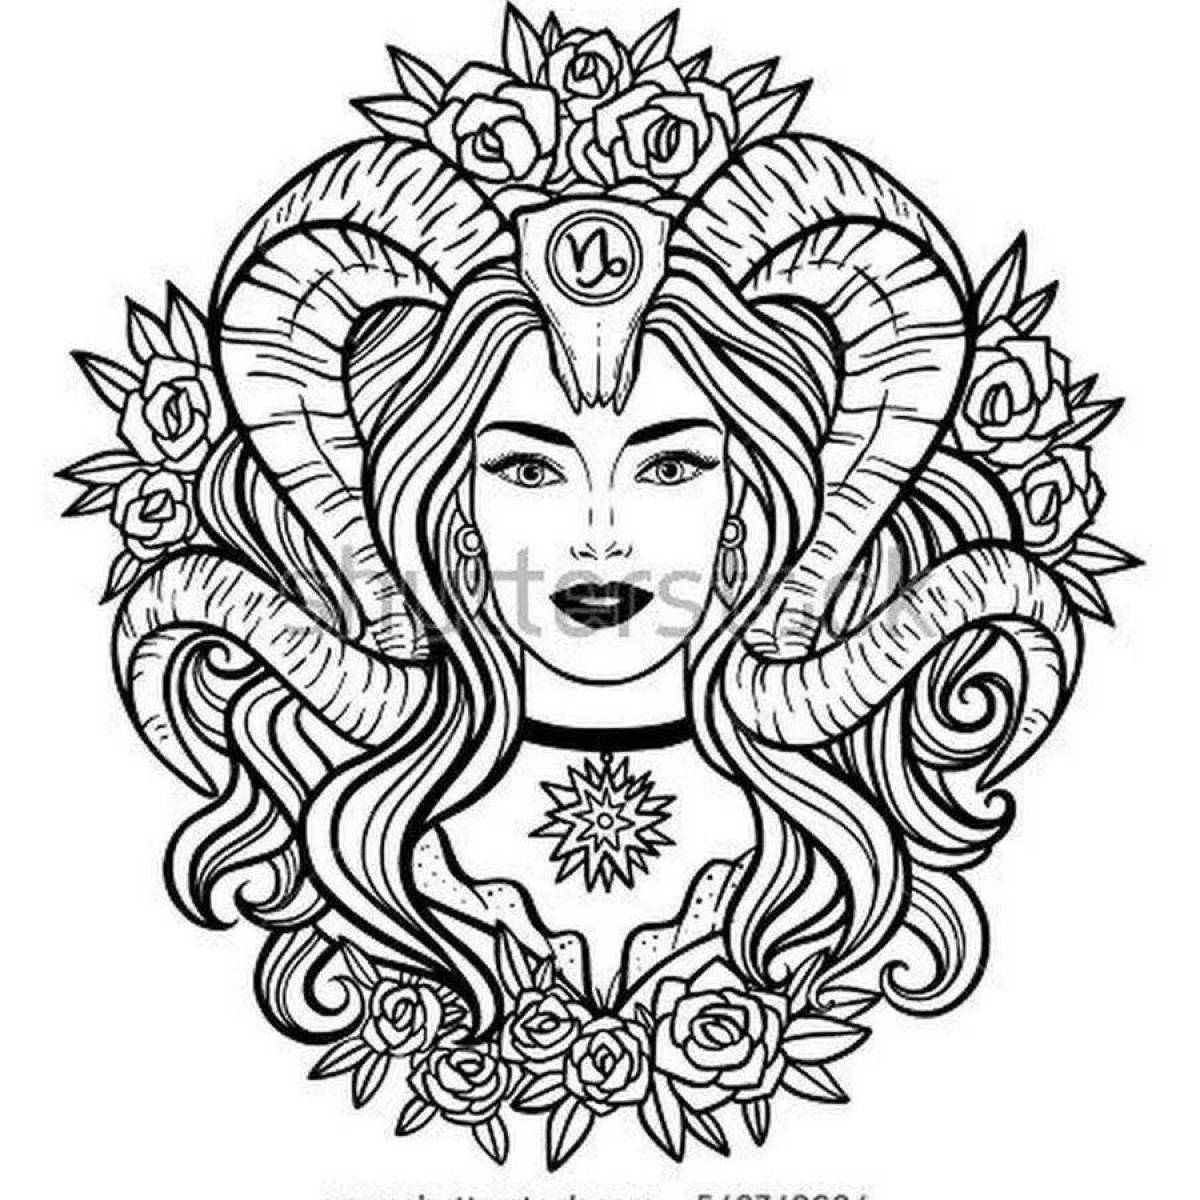 Coloring page of the living zodiac sign Capricorn